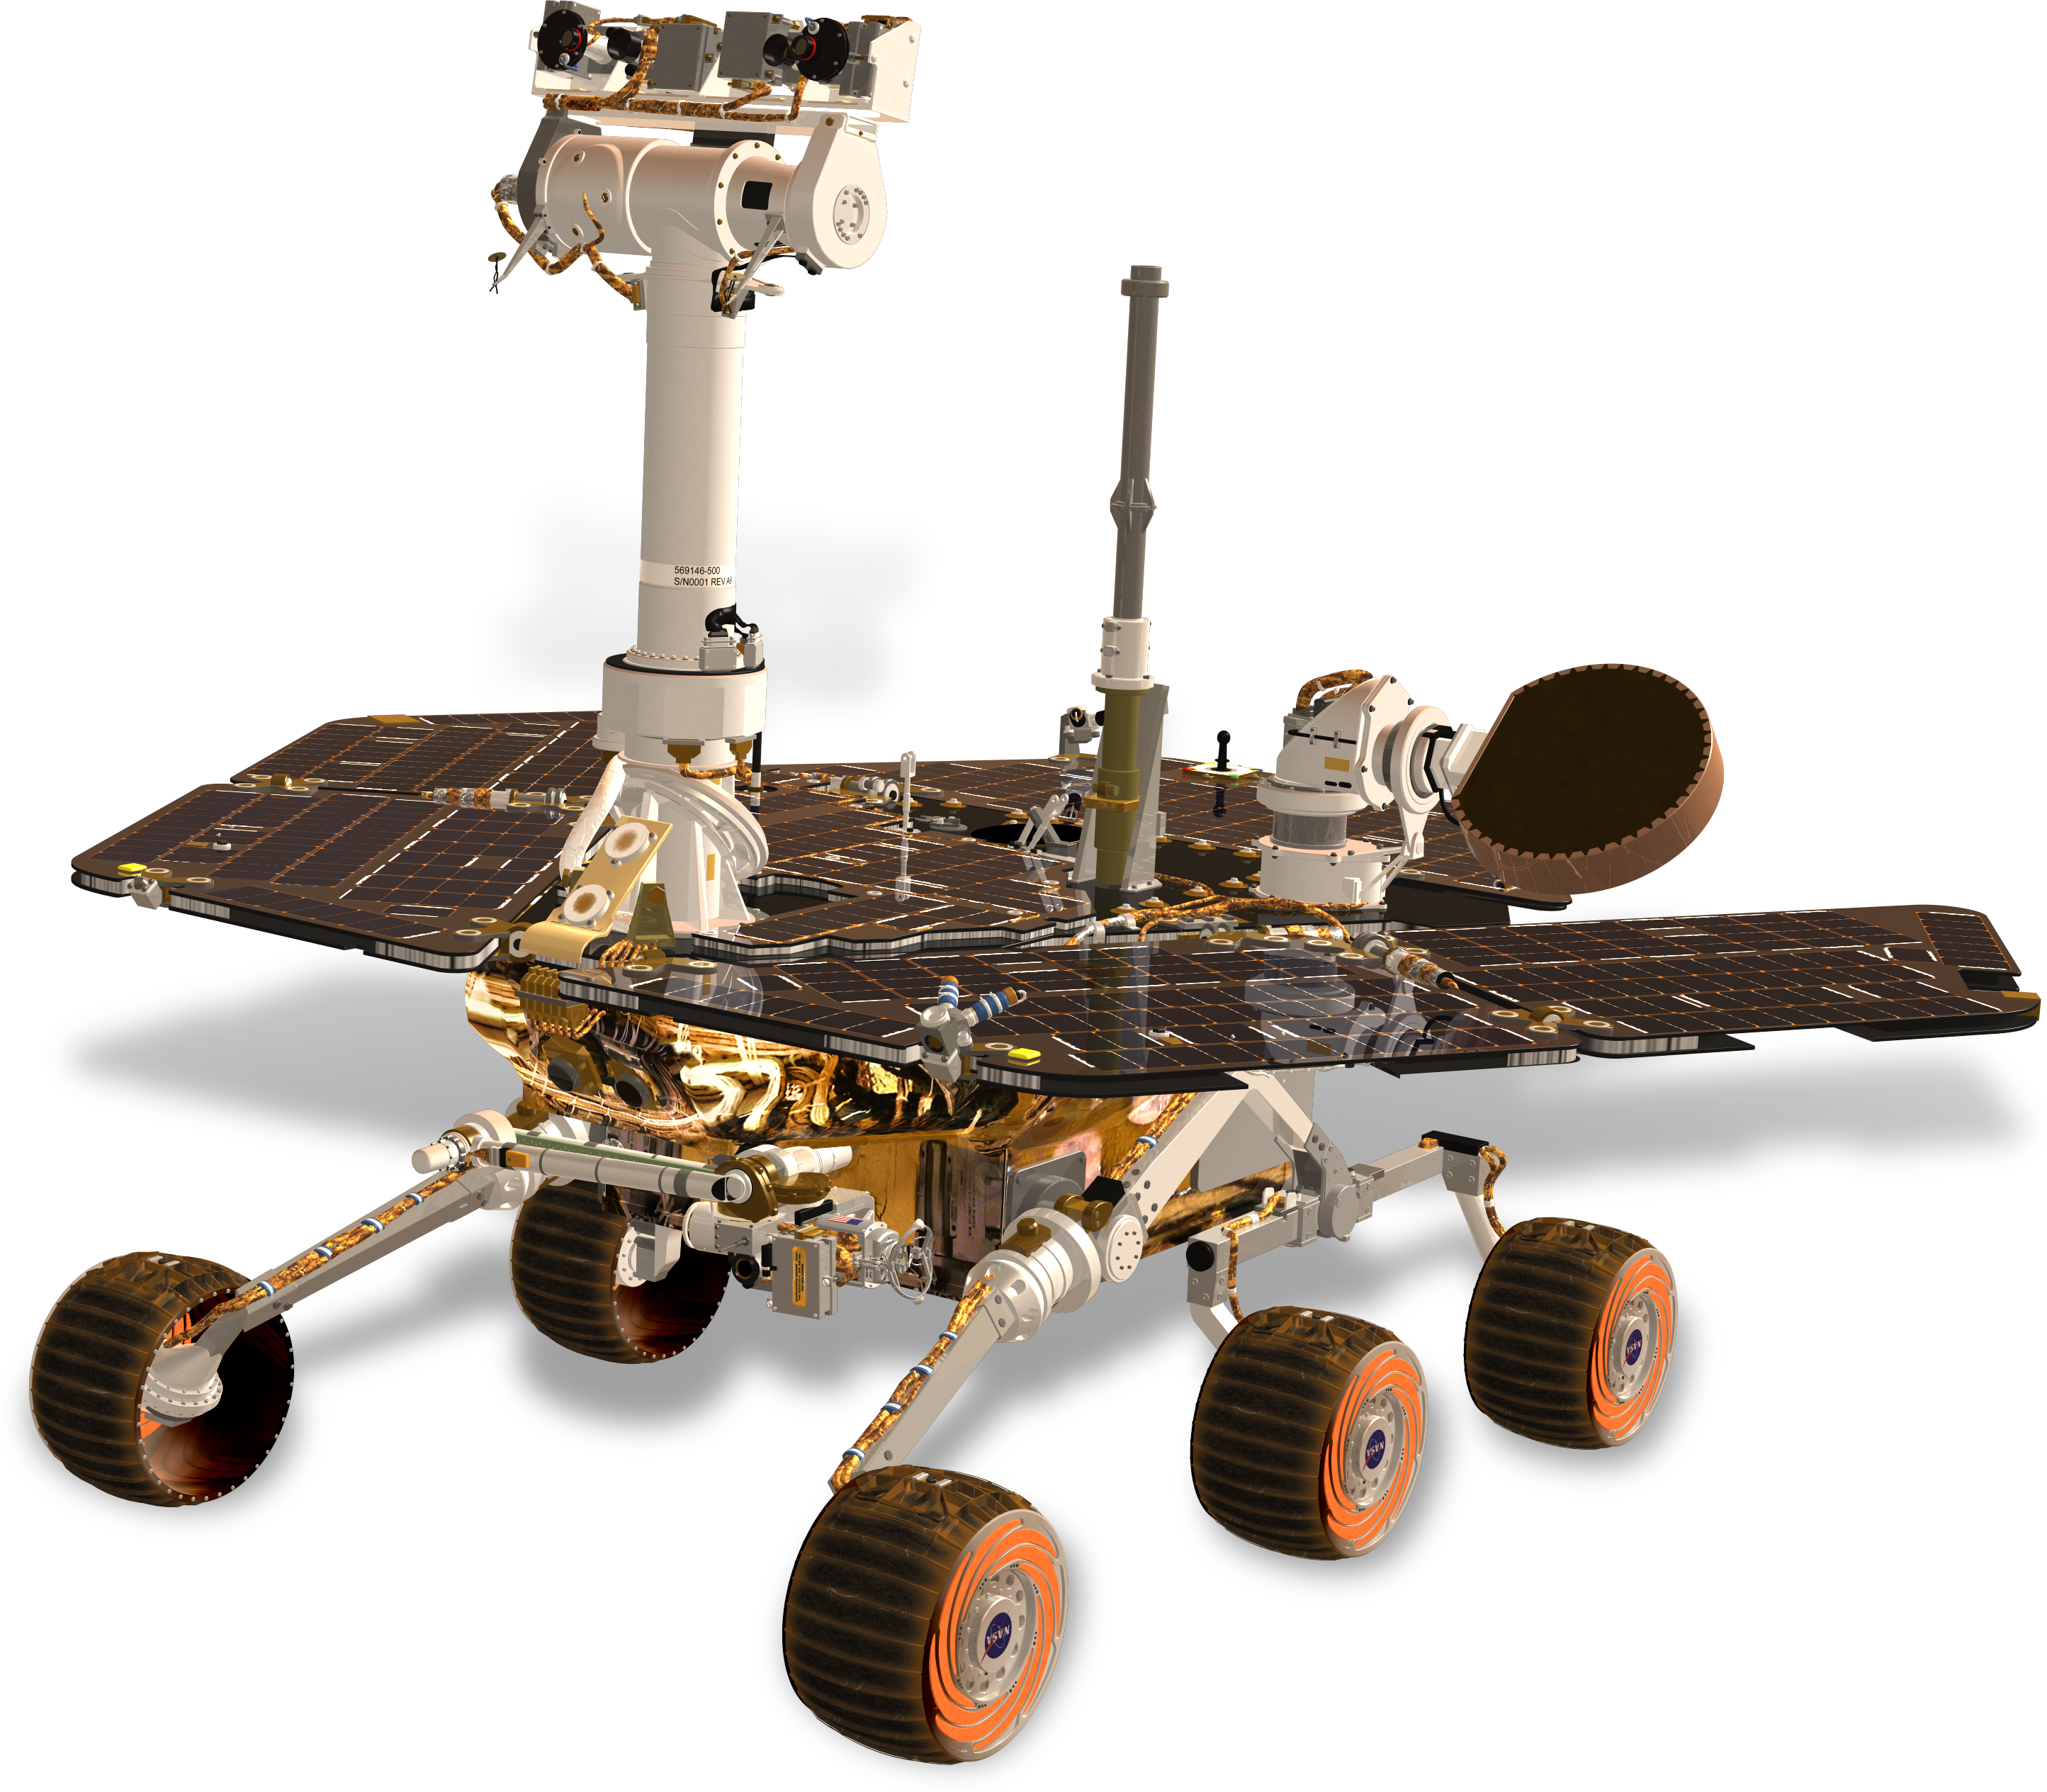 Artist's concept image of NASA's Mars Exploration Rovers, Spirit and Opportunity